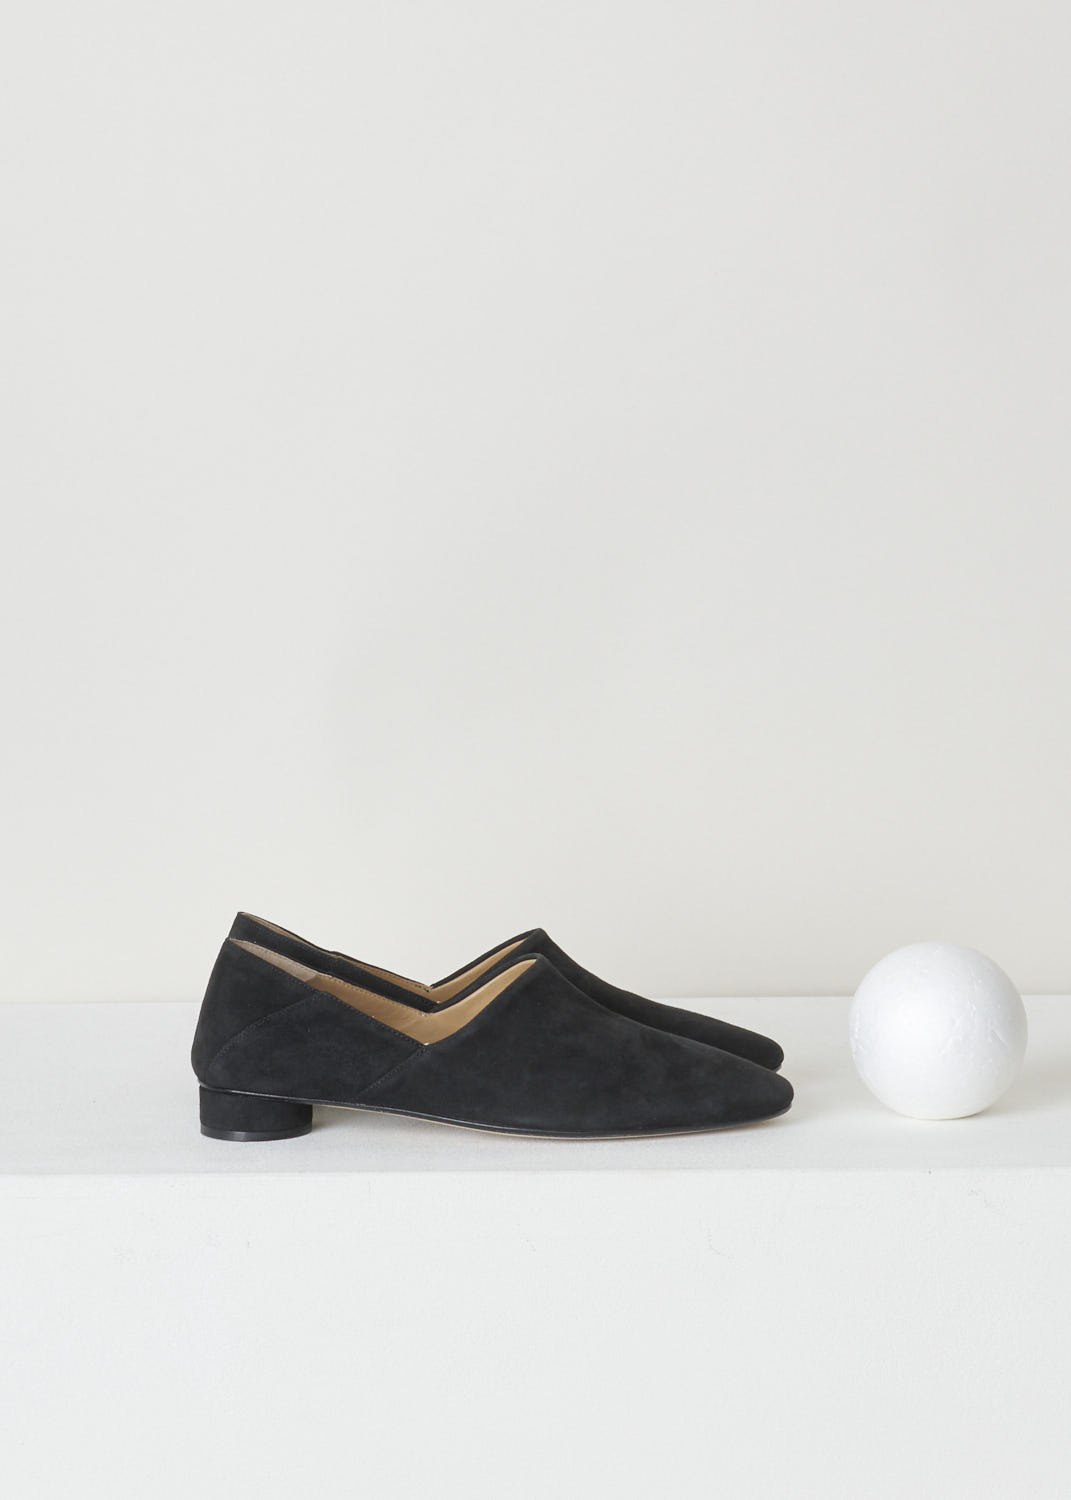 THE ROW, BLACK SUEDE SLIPPER, NOELLE_F1000_L25_BLK, Black, Side, Minimalistic black suede slipper. The slip-in model features a rounded toe vamp. The sober design is exactly what makes these shoes so beautiful.
